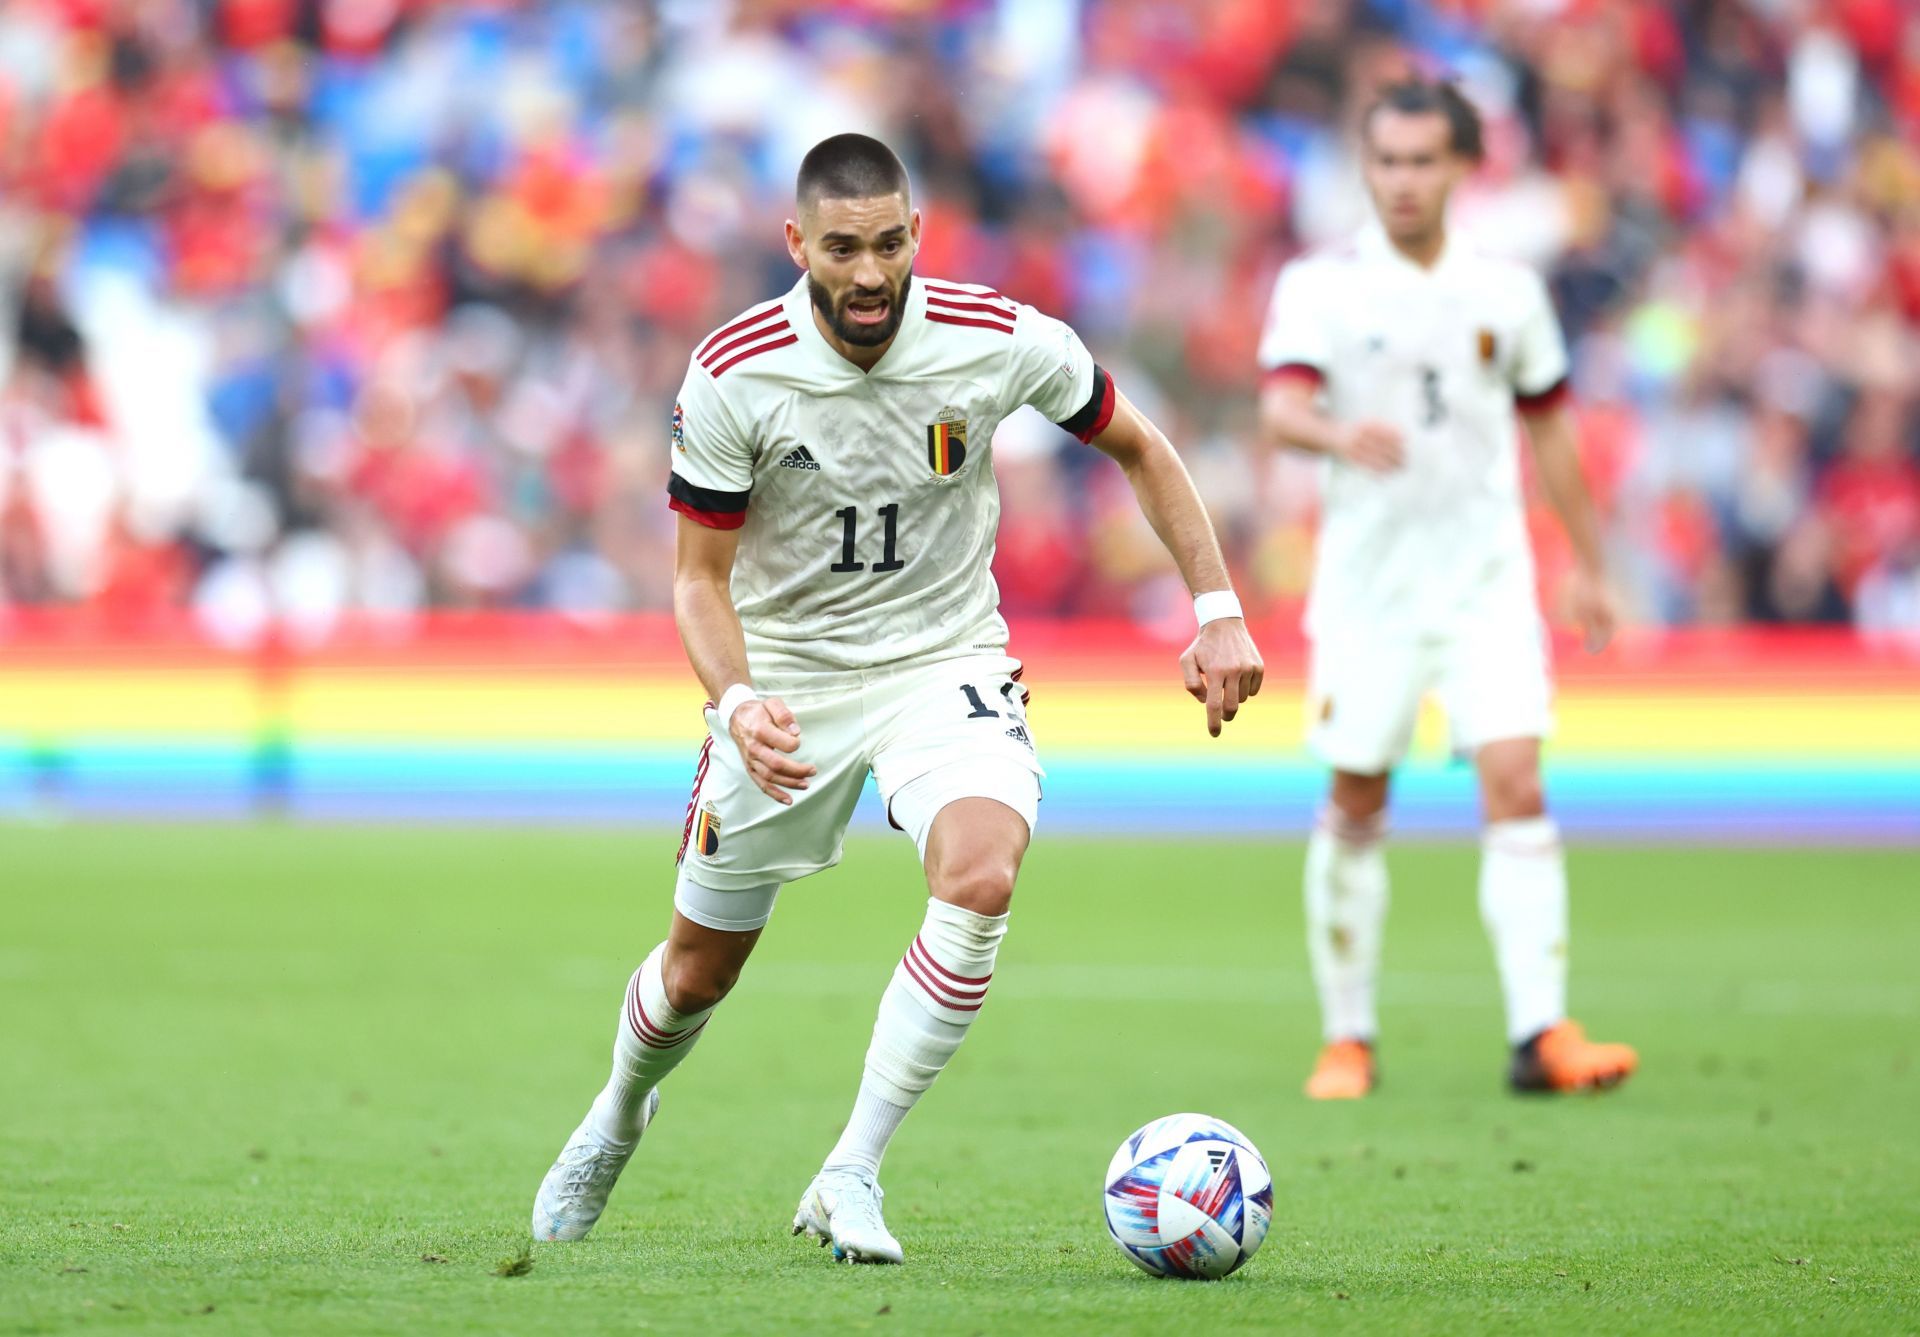 Yannick Carrasco could have arrived at Old Trafford this summer.